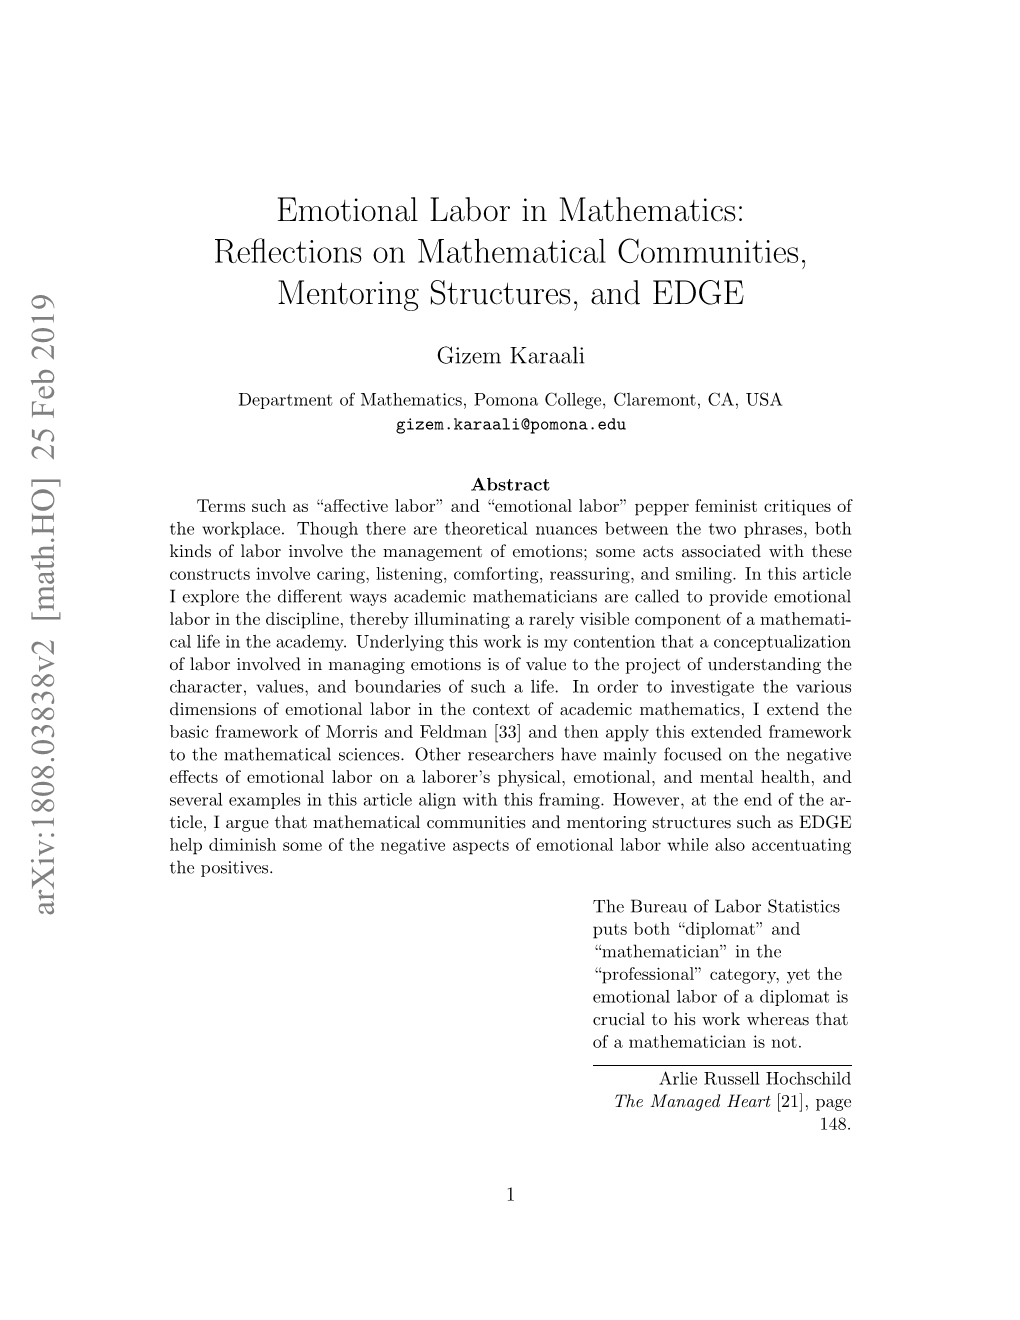 Emotional Labor in Mathematics: Reflections on Mathematical